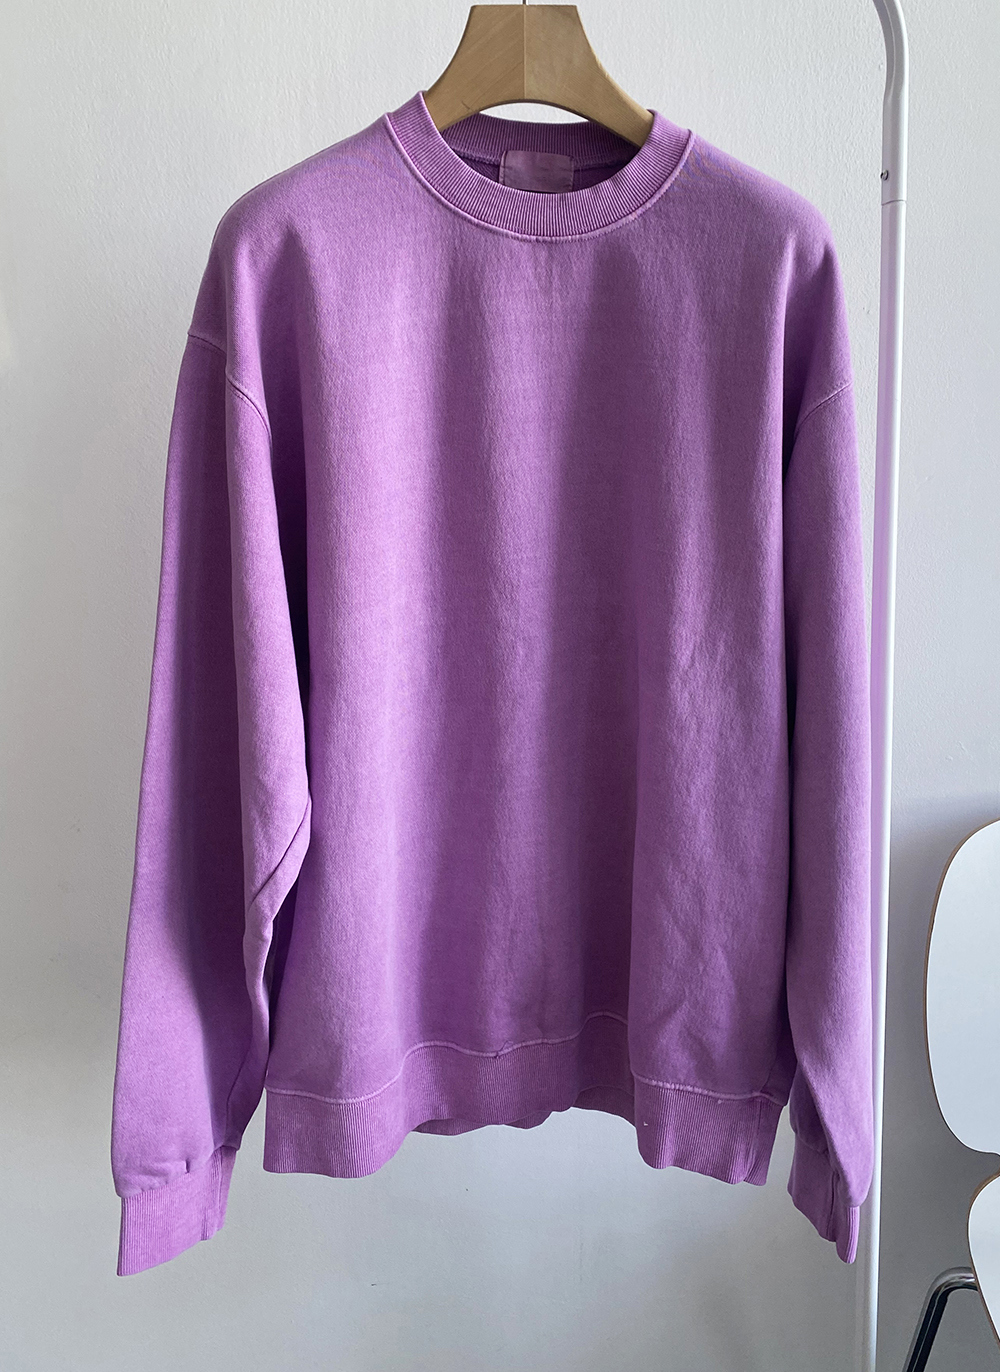 long sleeved tee detail image-S1L65